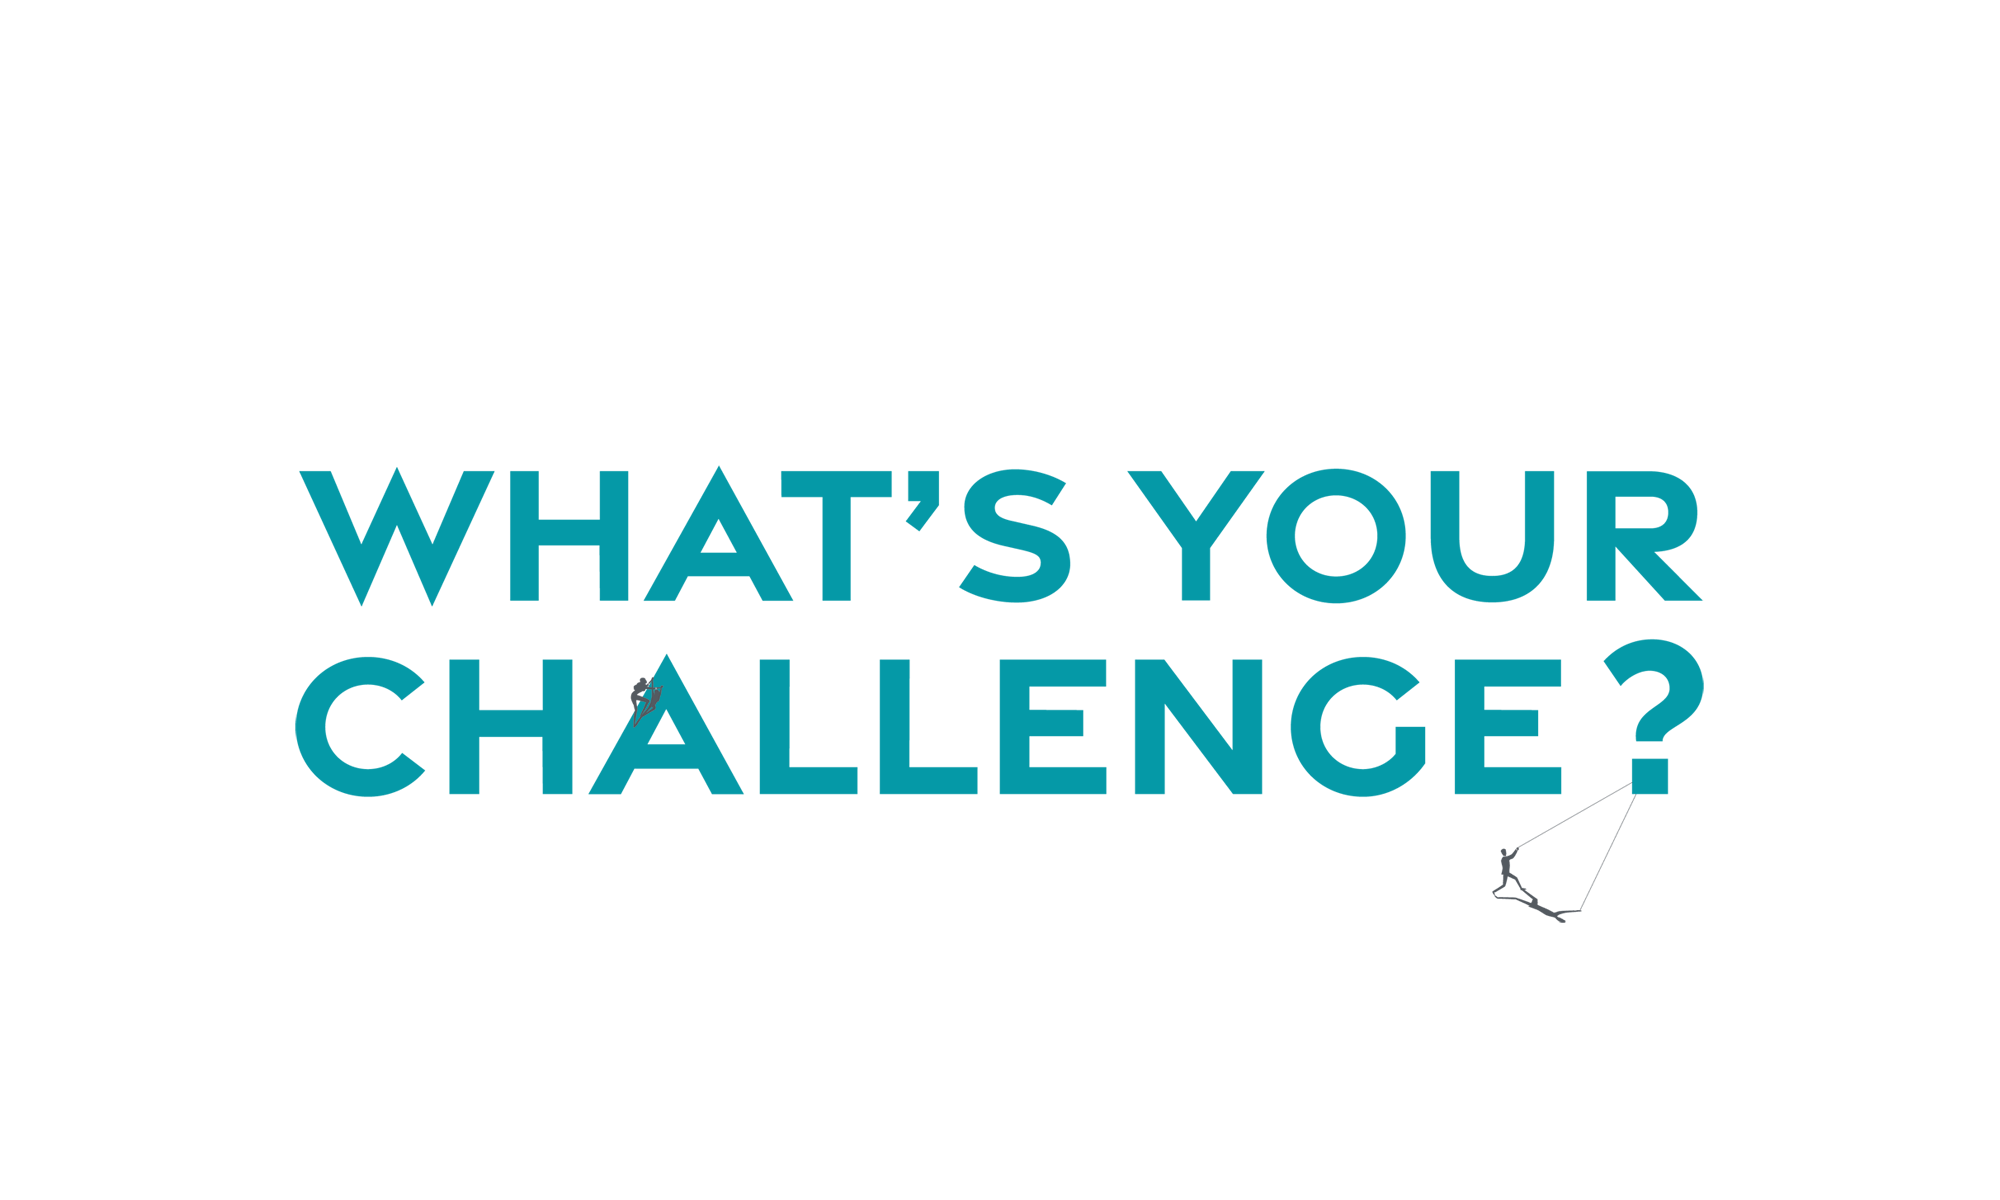 What's your challenge?